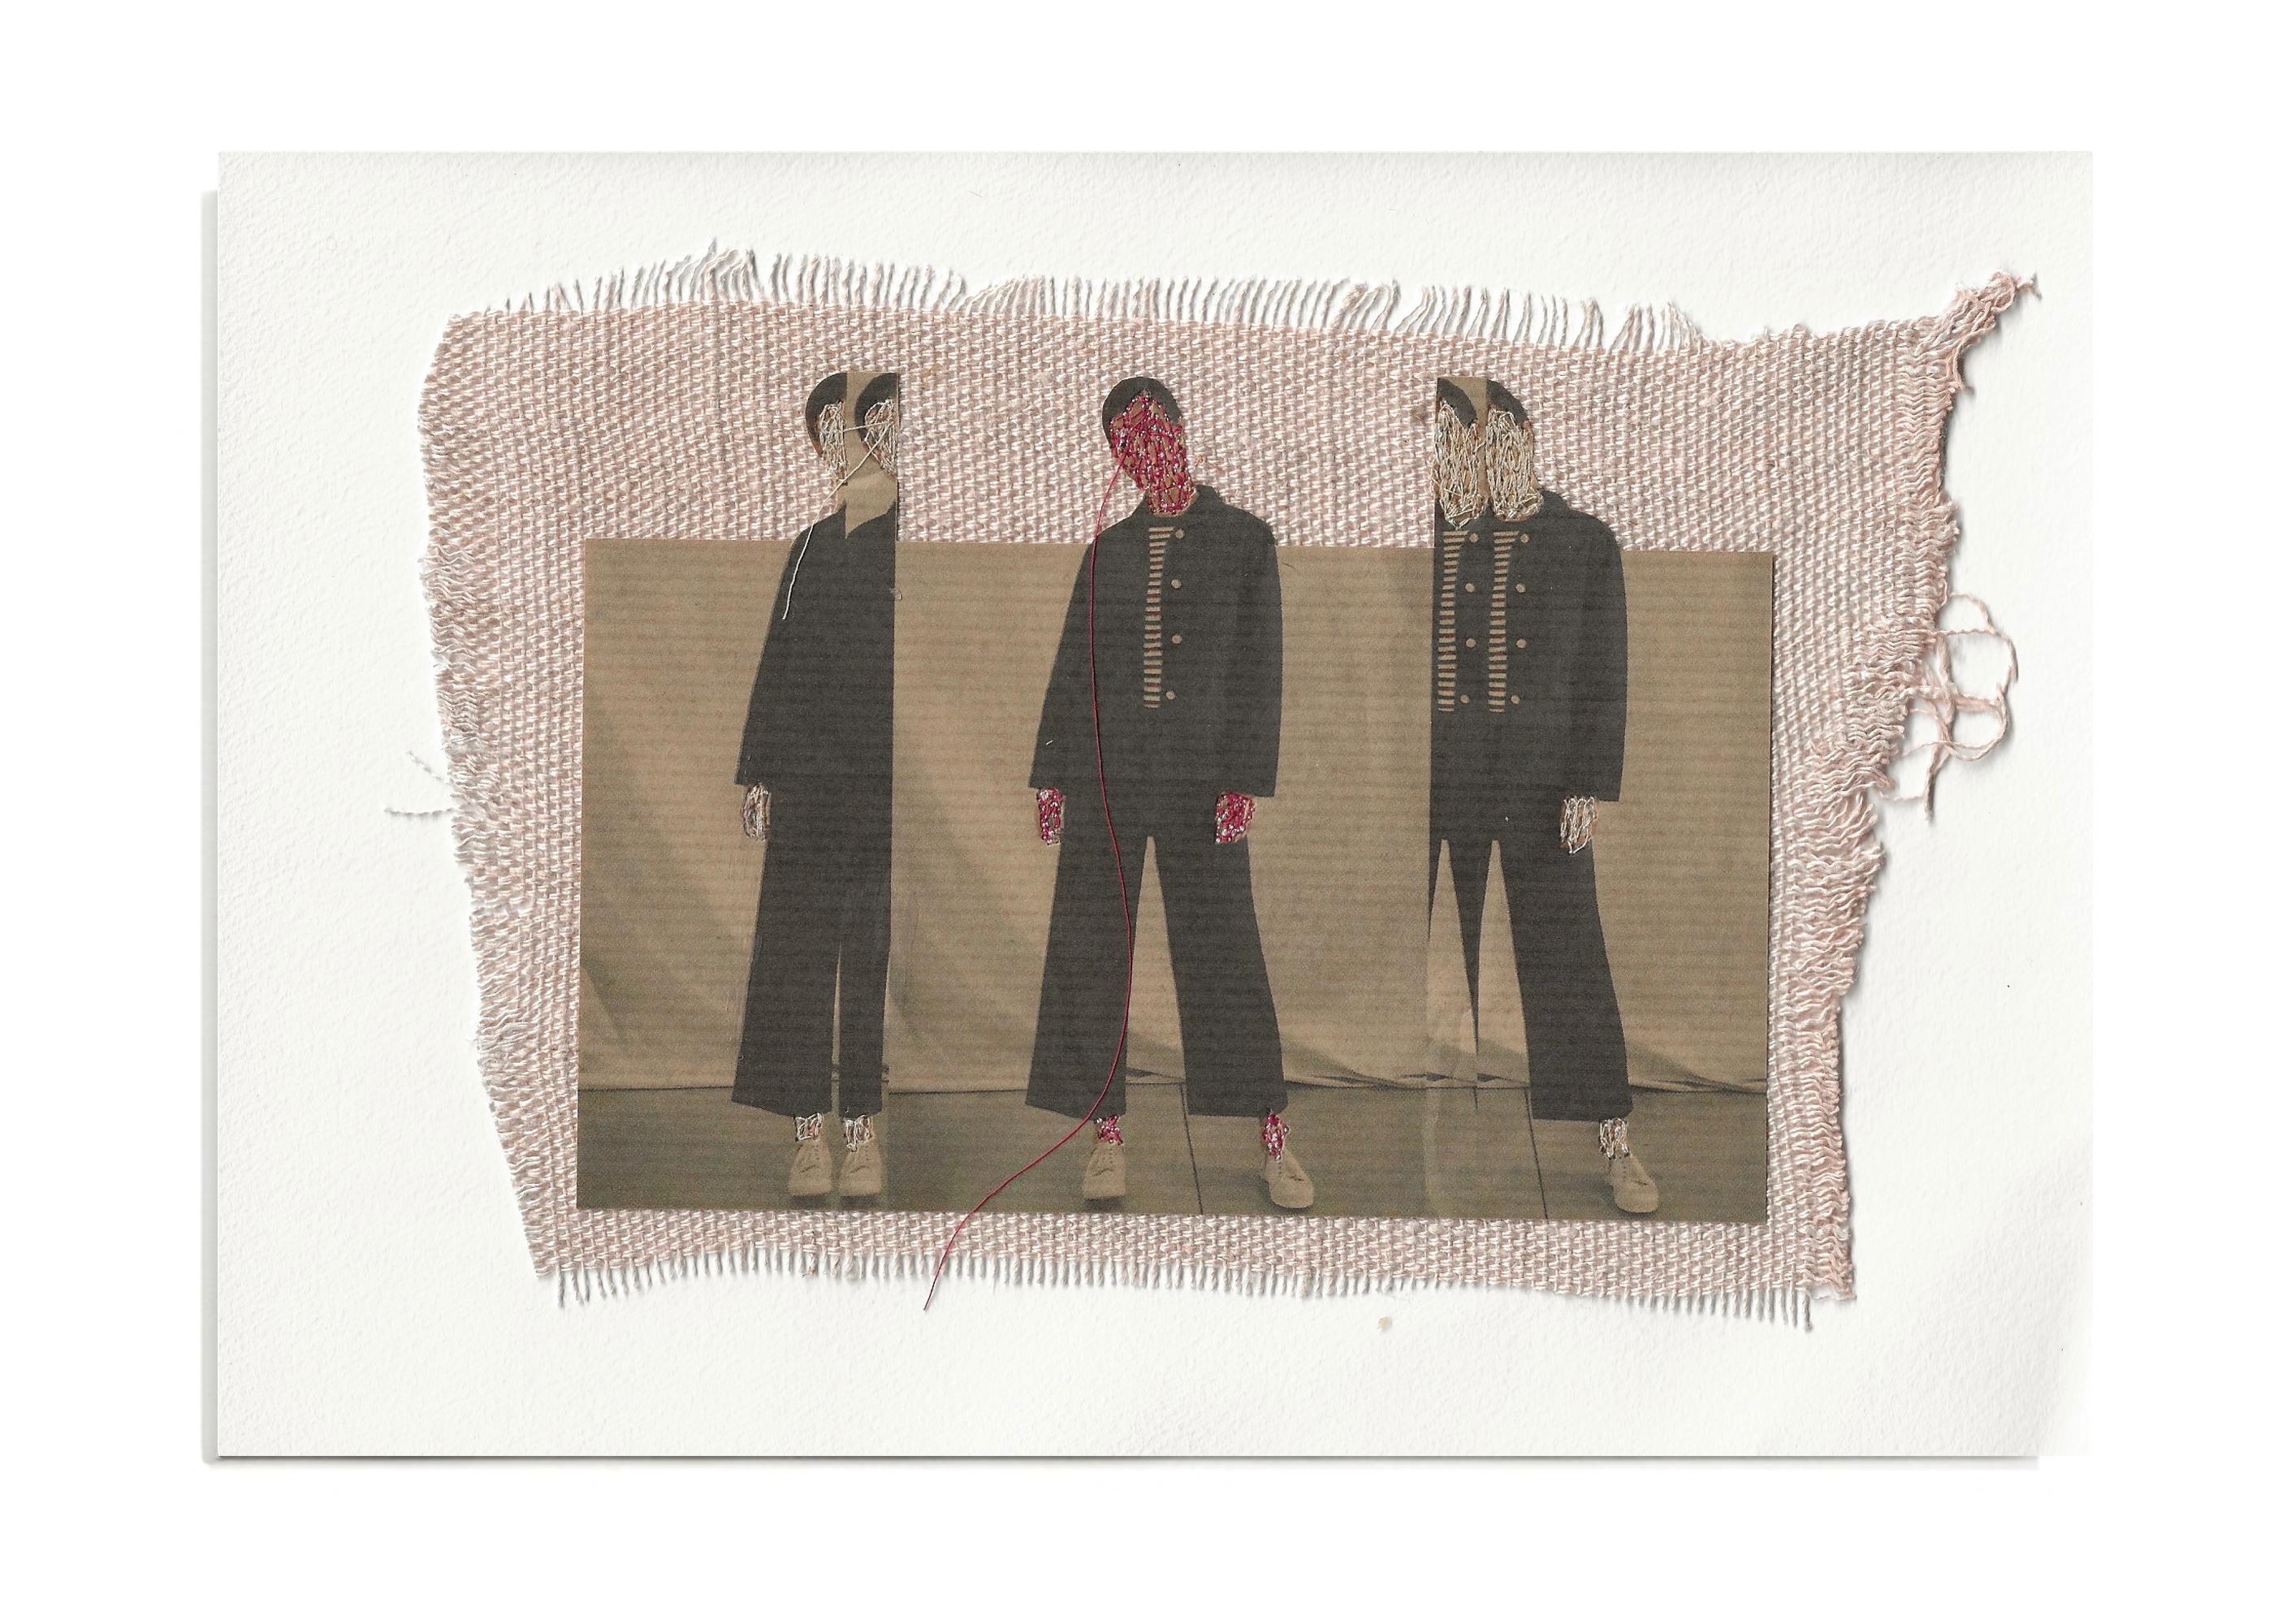 Michele Landel Figurative Photograph - She 55 - brown pink contemporary embroidered photo transfer of women on fabric